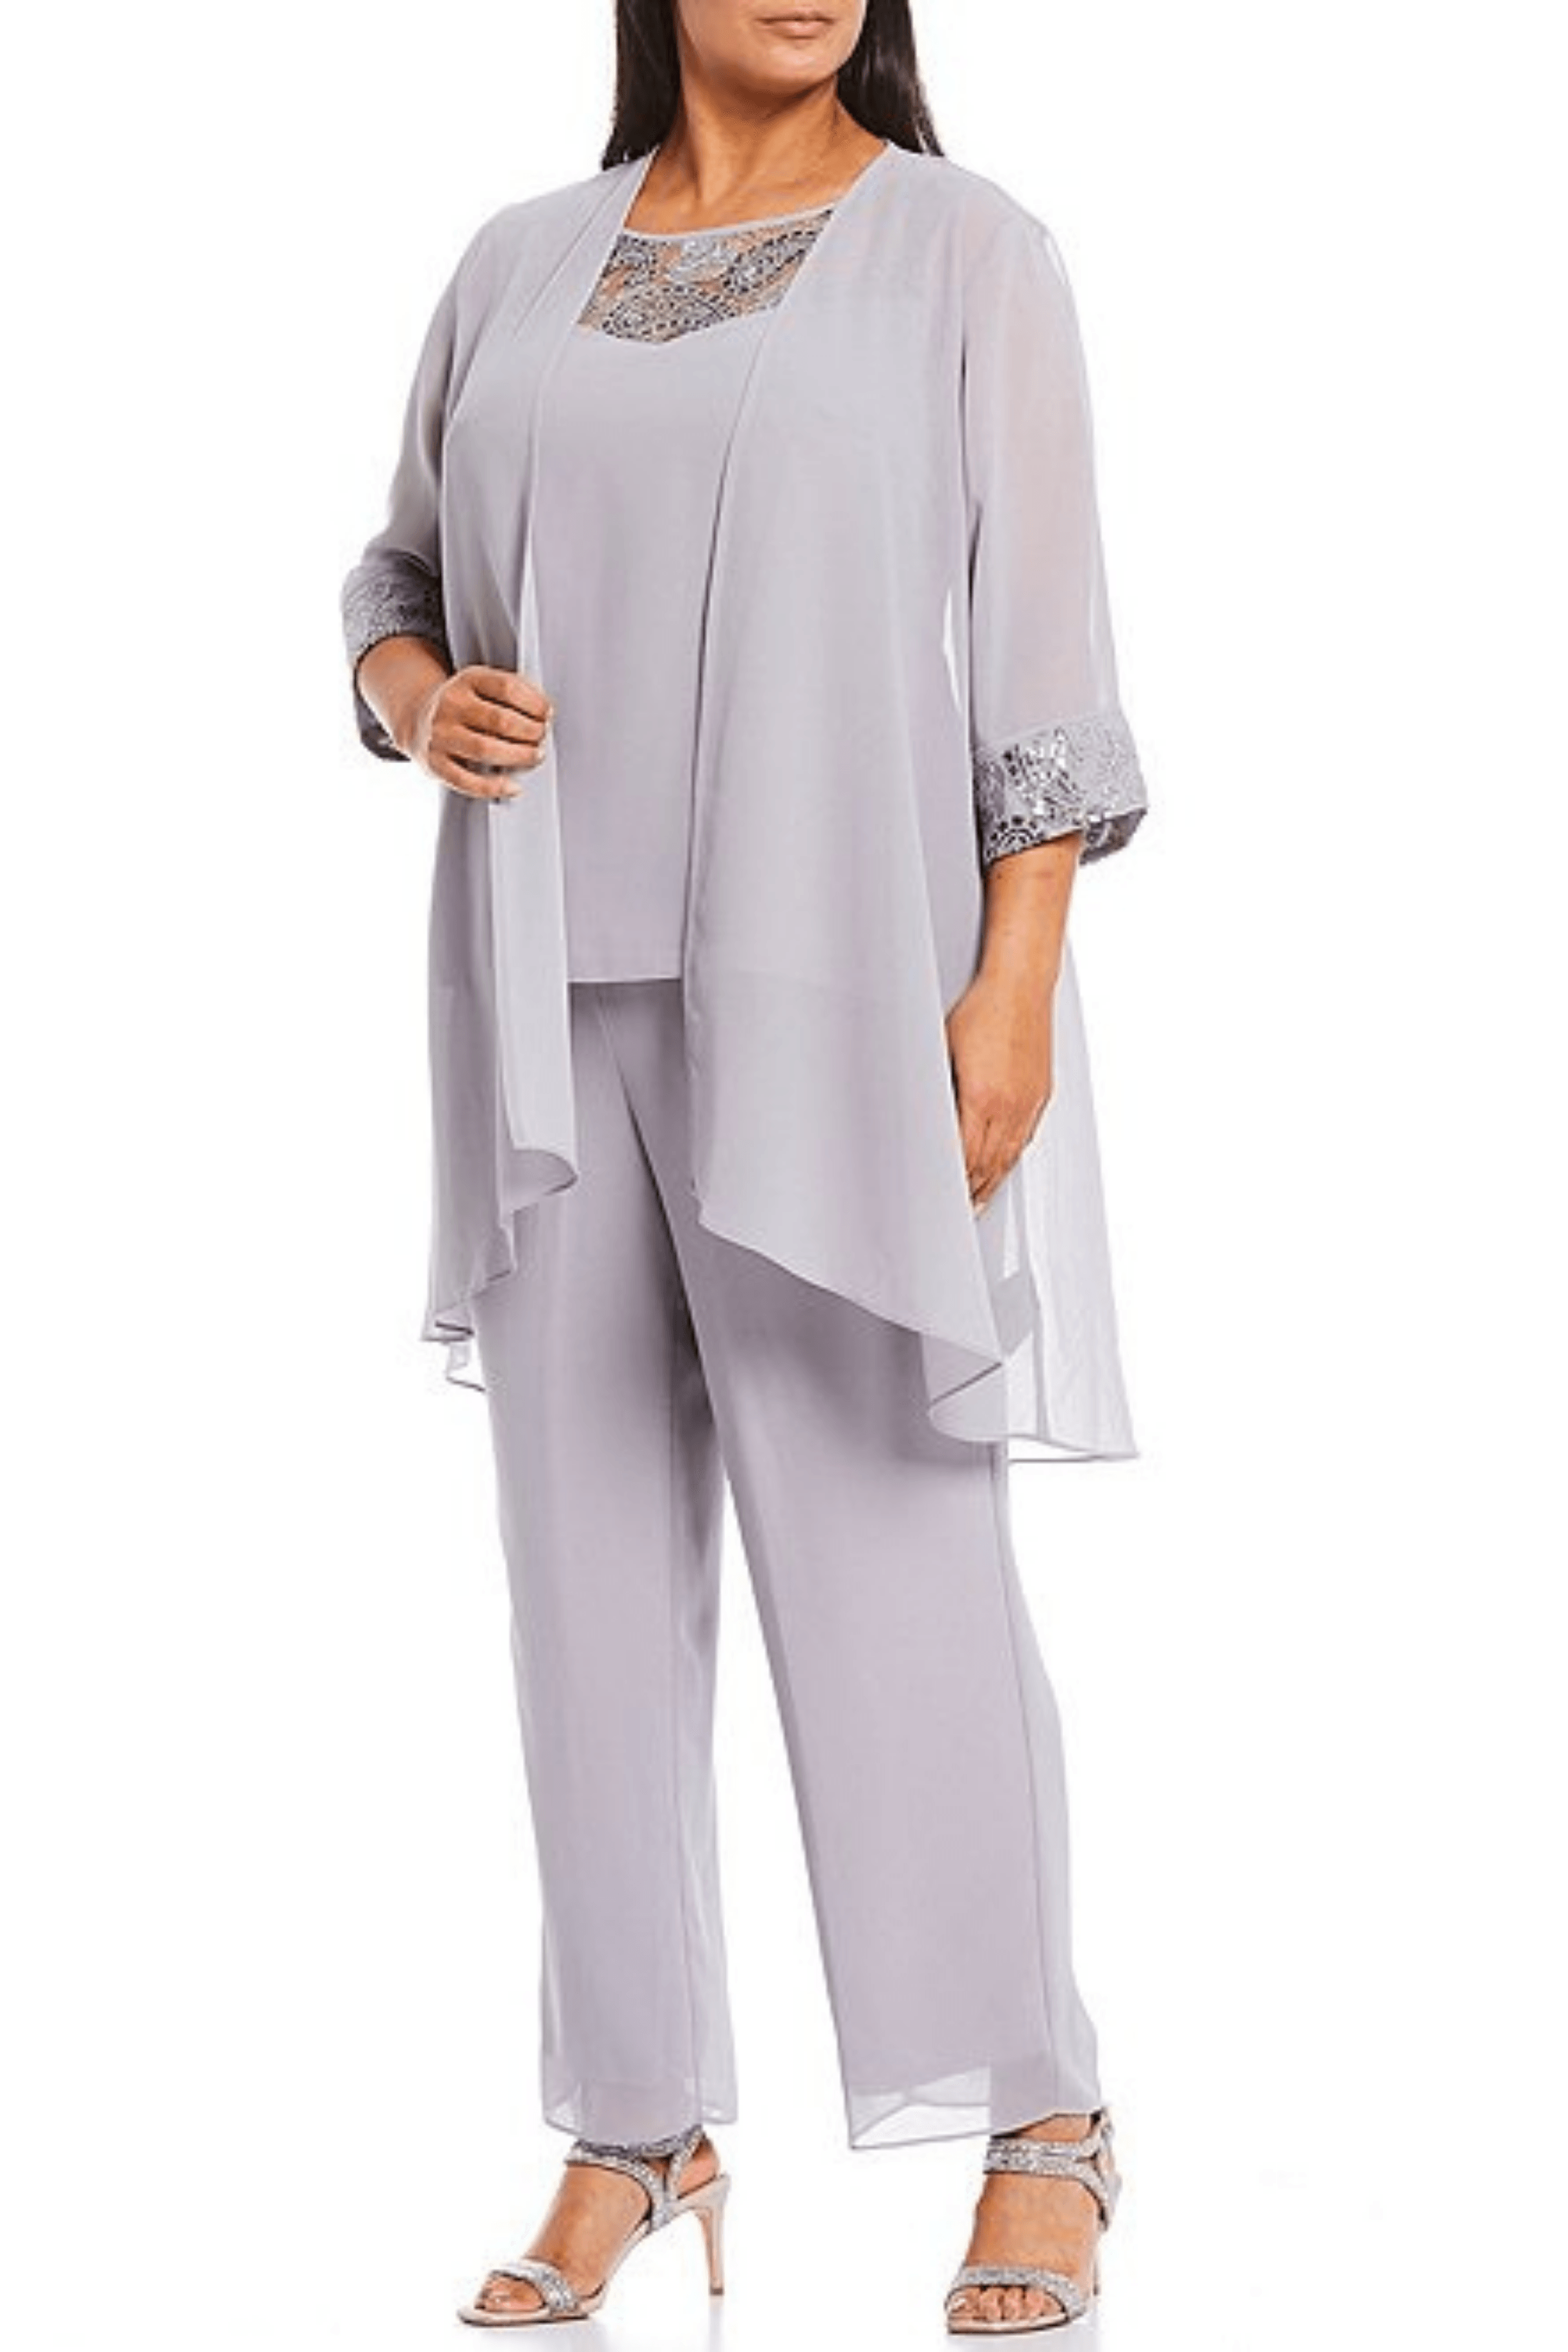 Le Bos Long Formal Evening 3 Piece Pant Set 26335 for $114.99 – The ...